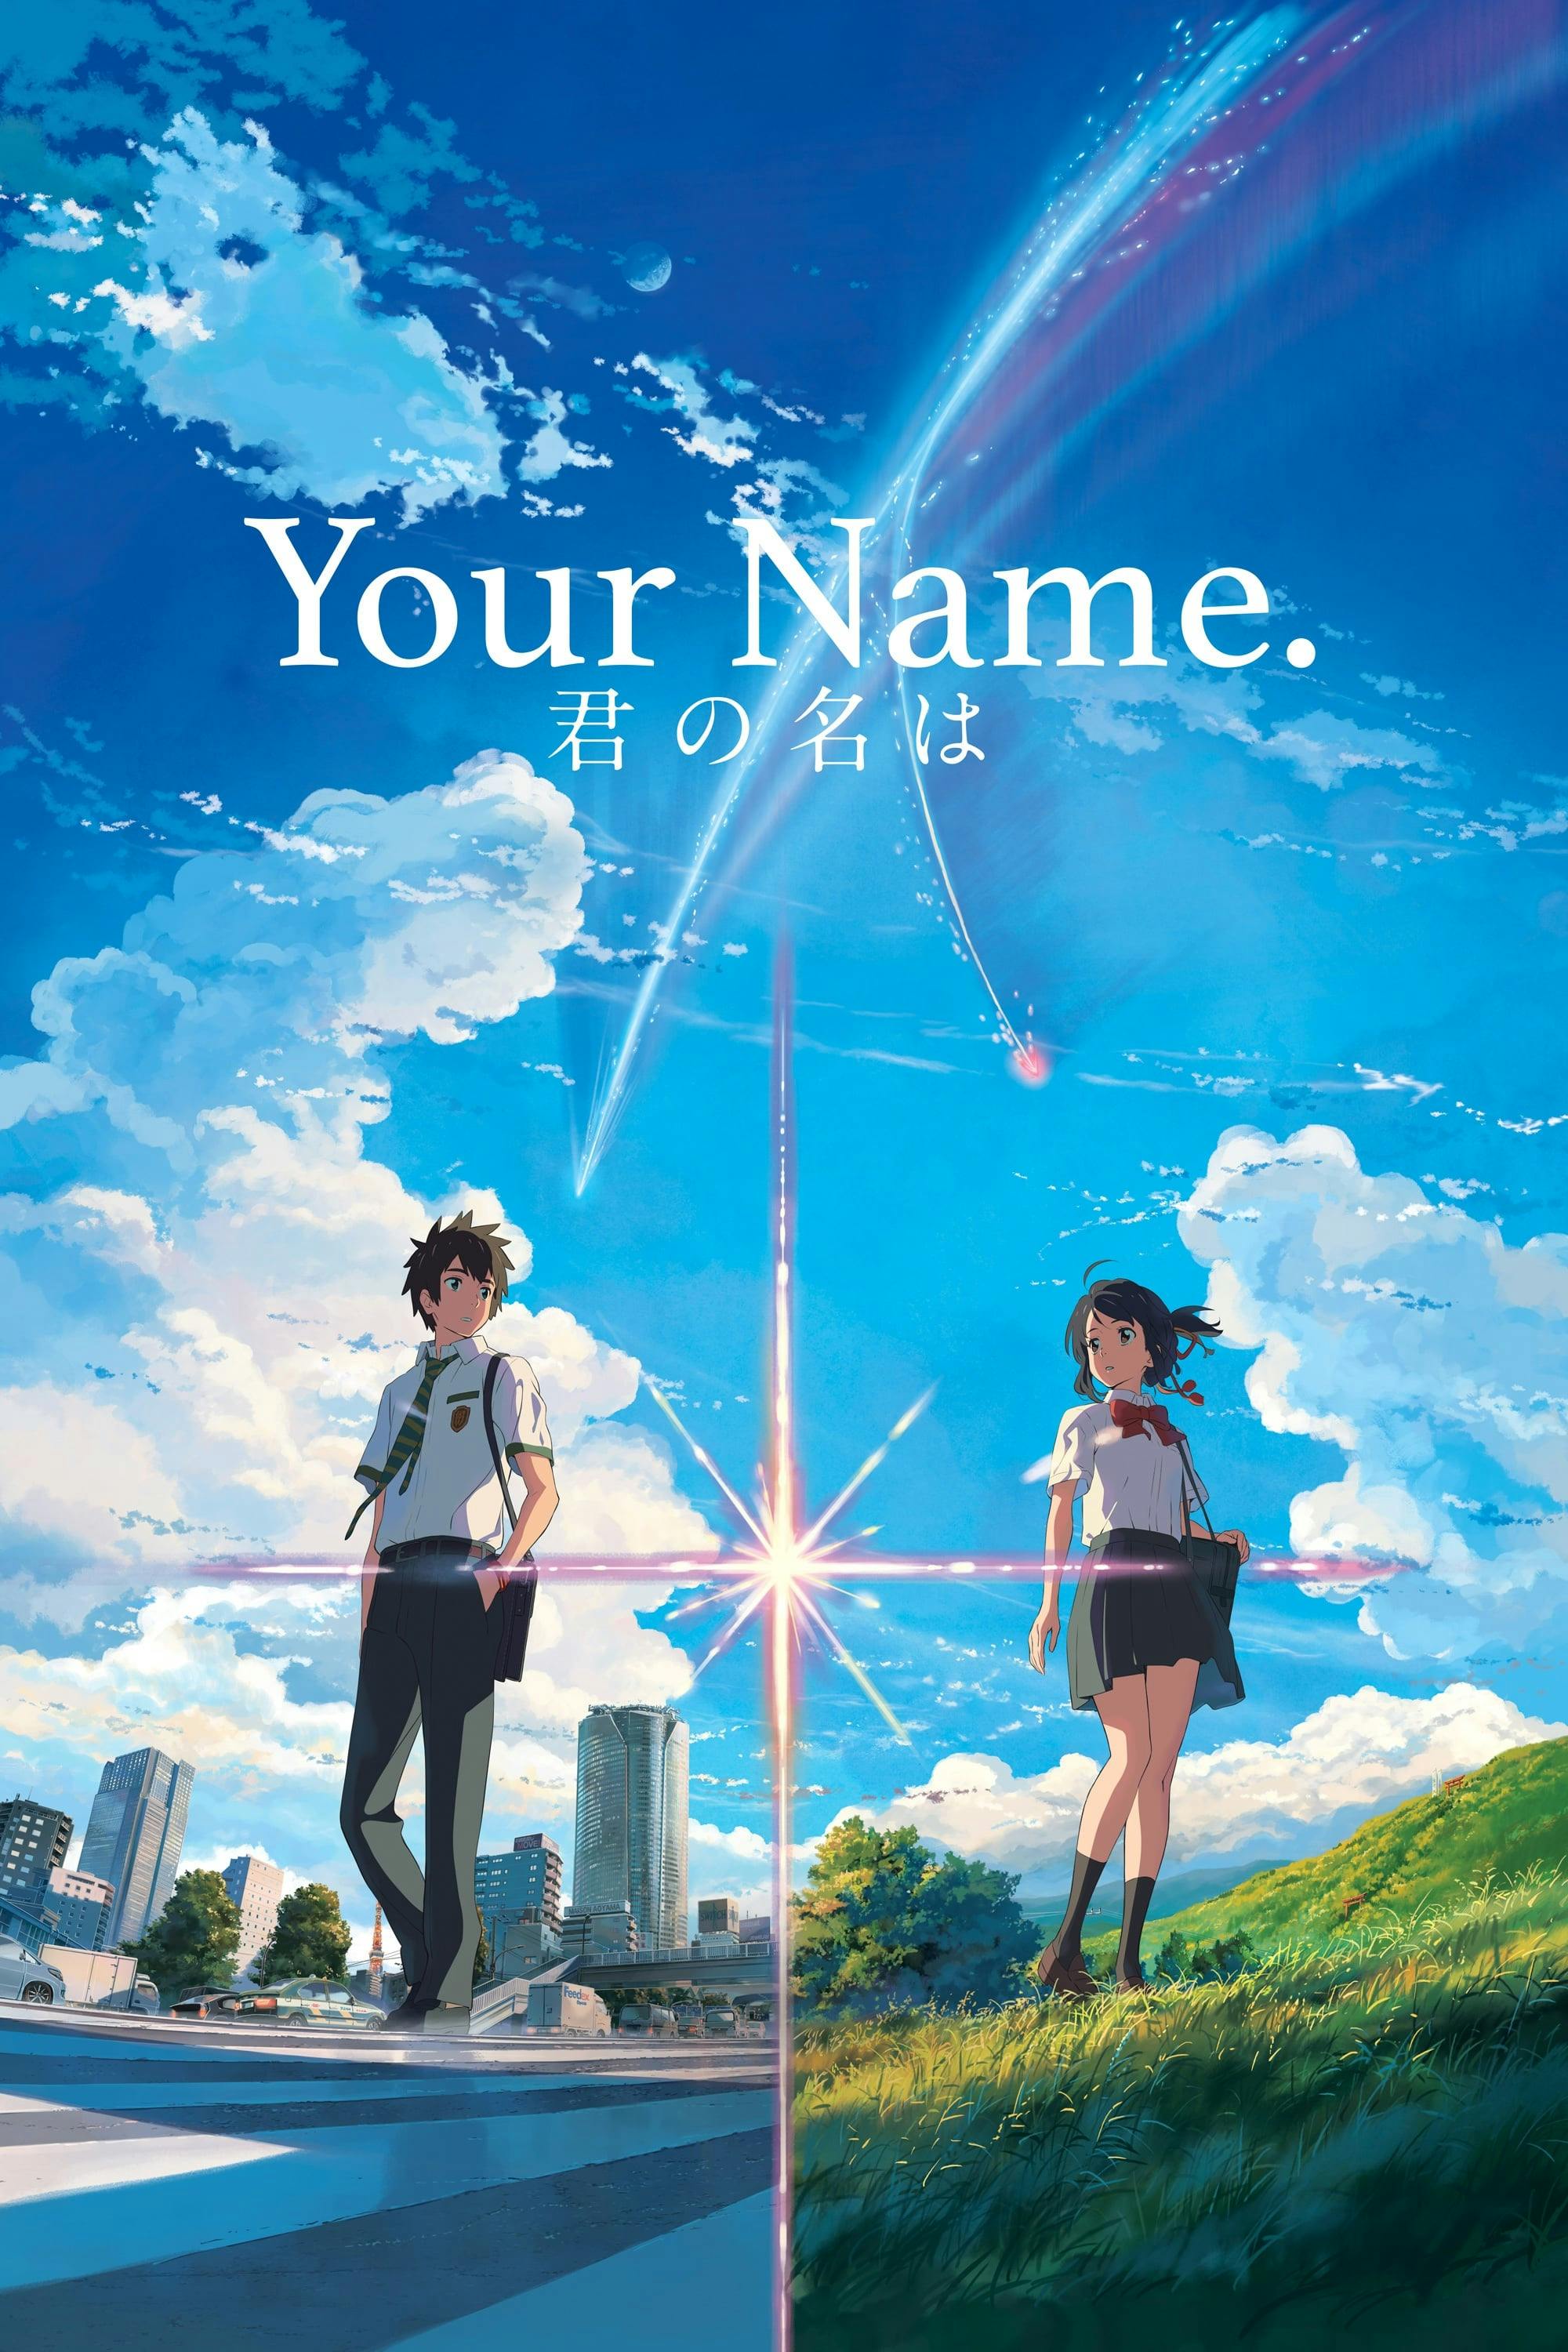 Movie poster of "Your Name."